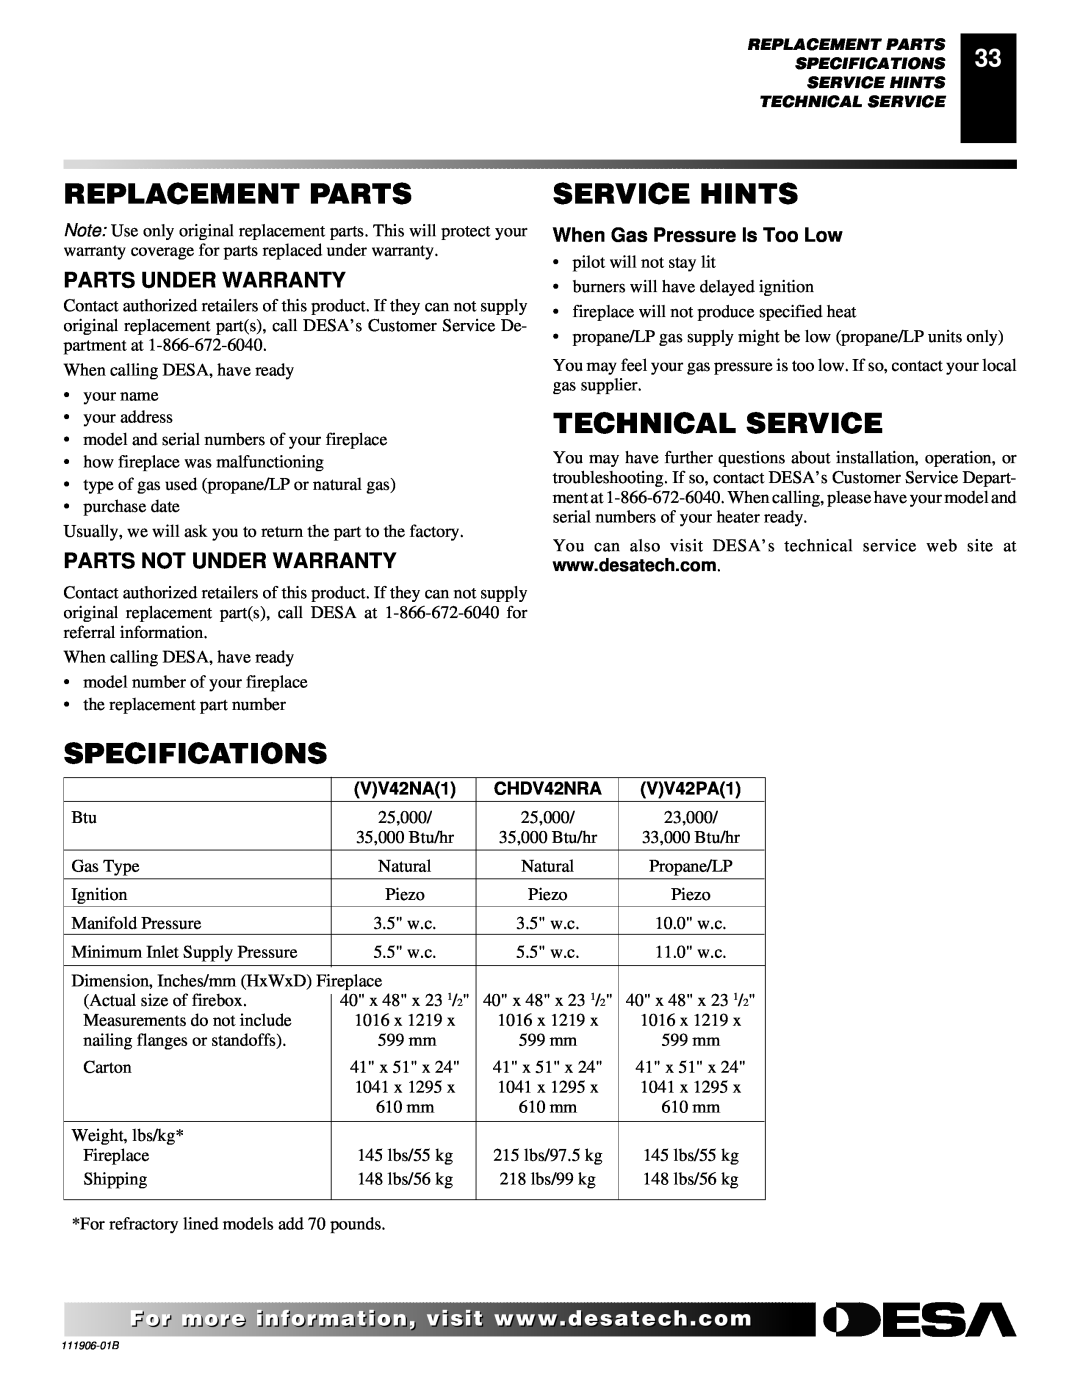 Desa CHDV42NRA, (V)V42PA(1) installation manual Replacement Parts, Service Hints, Technical Service, Specifications 